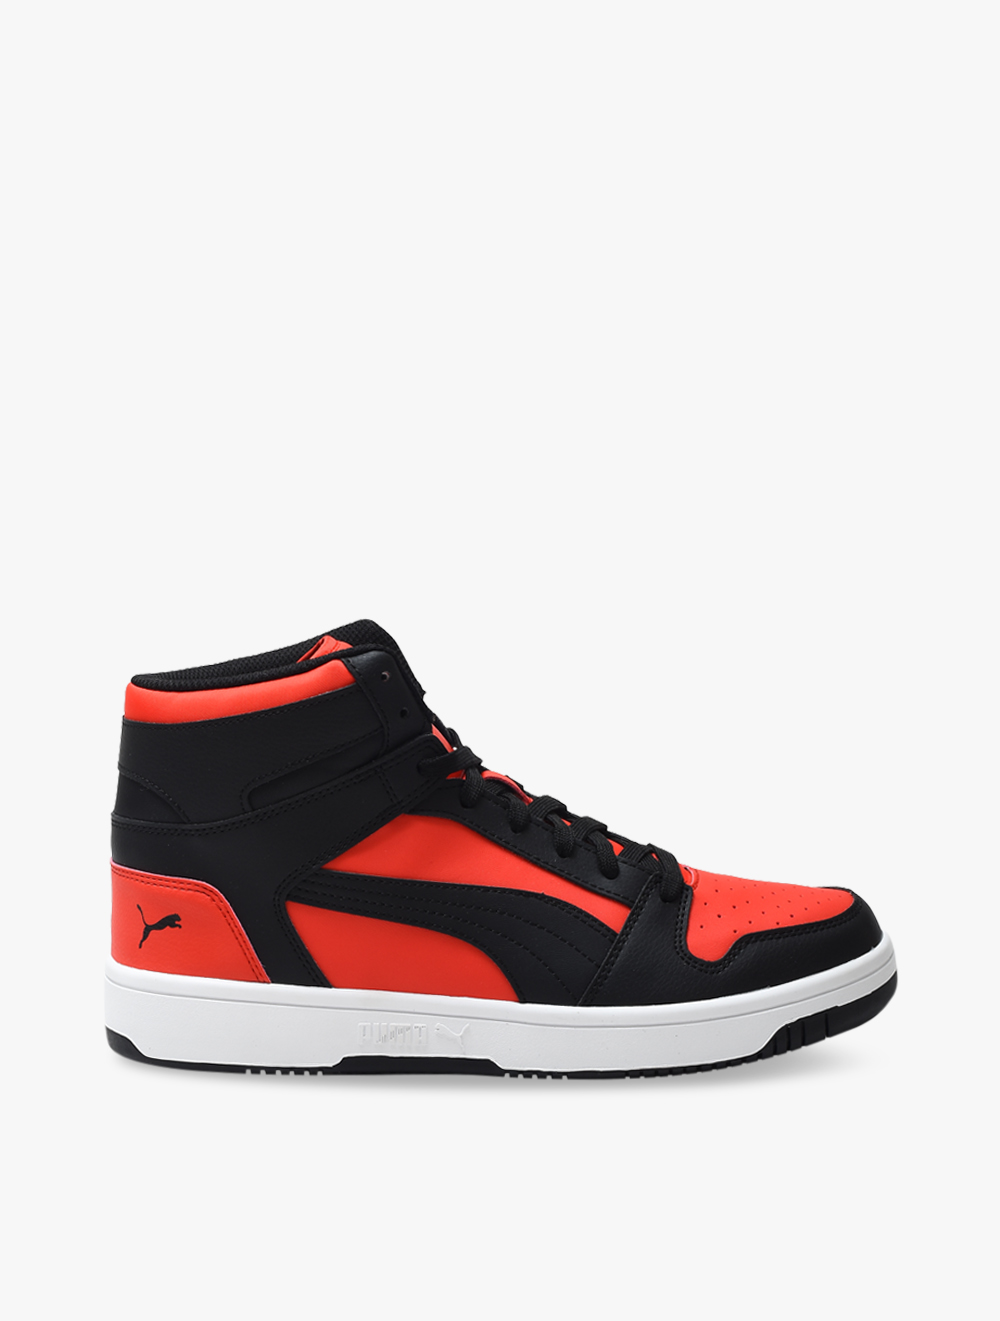 mens red and black puma shoes